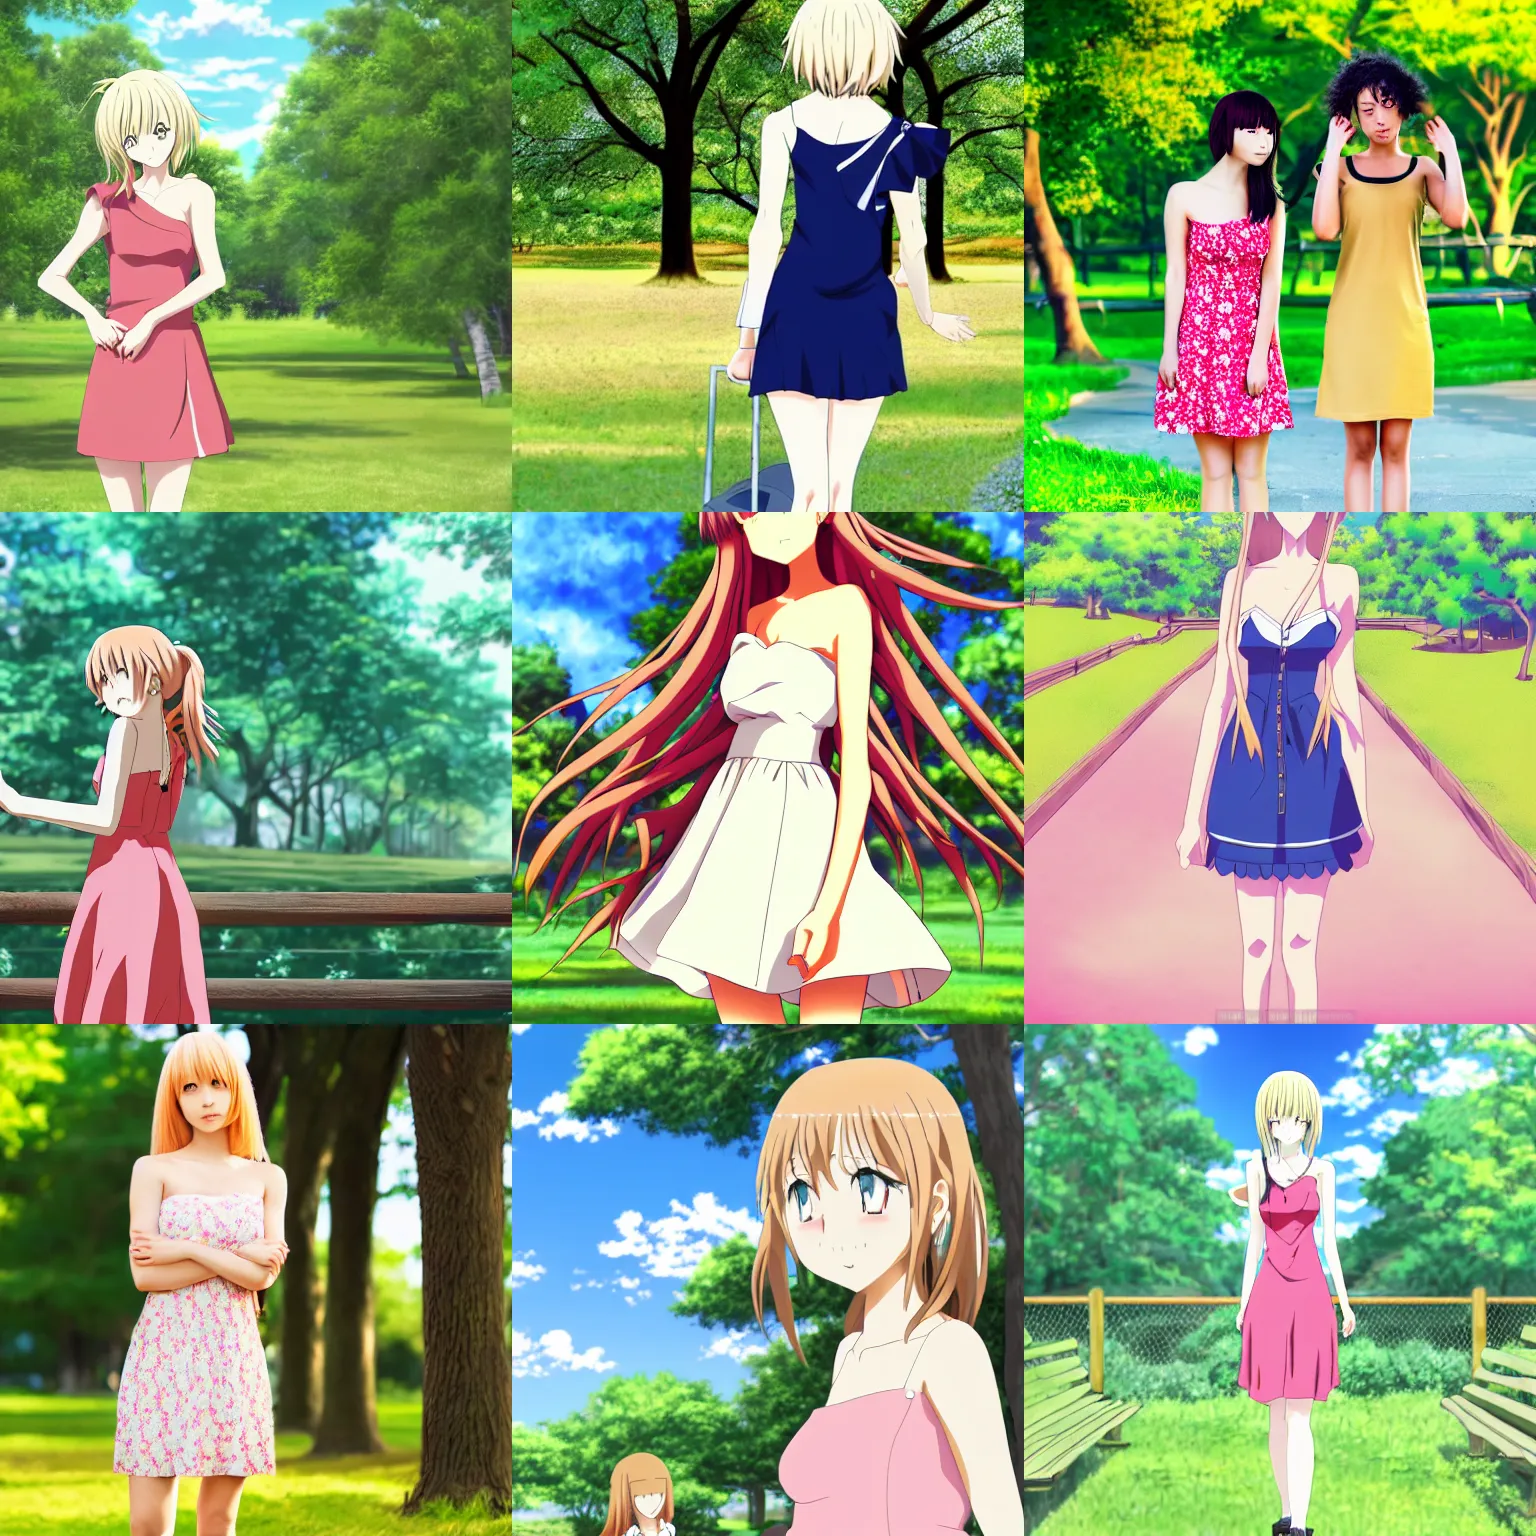 Prompt: high quality anime-style image of woman standing in a park, the woman is wearing a summer dress and has shoulder-length curly blonde hair, HD